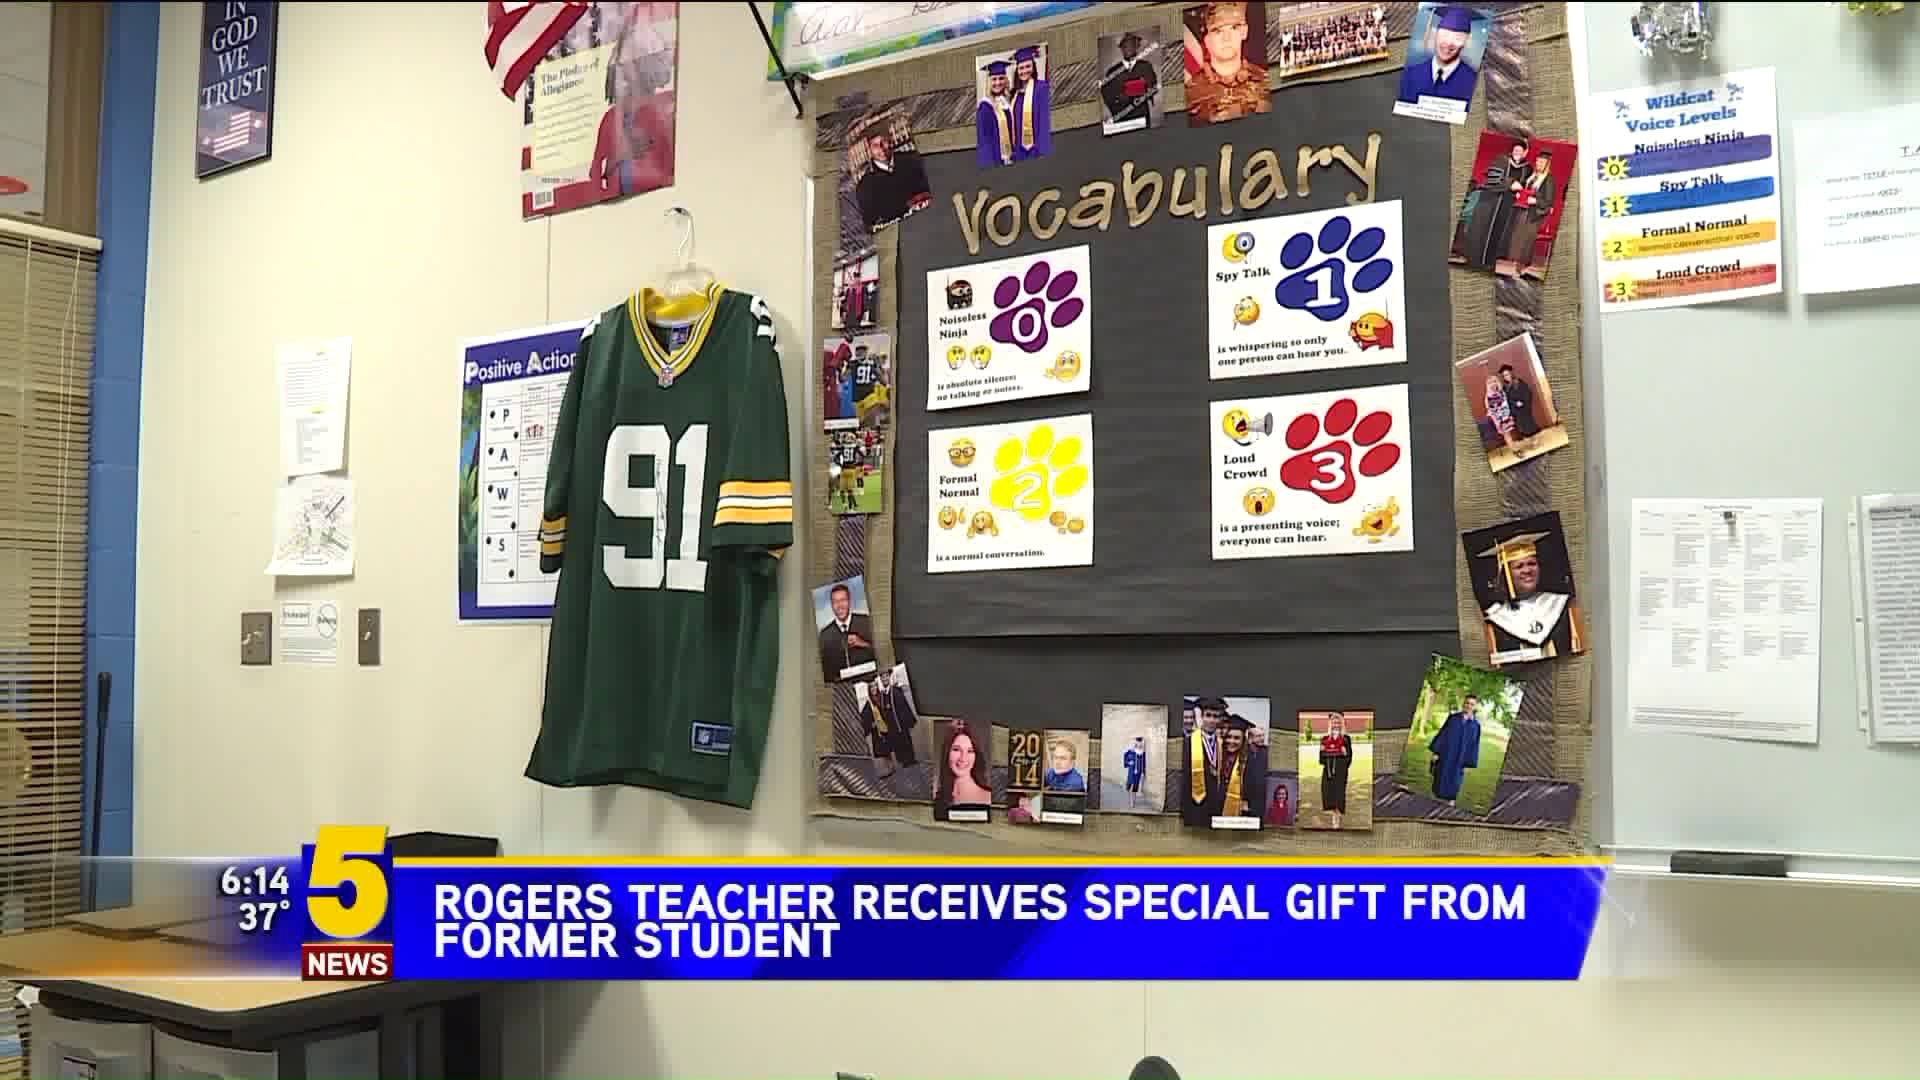 Rogers Teacher Receives Special Gift From Former Student